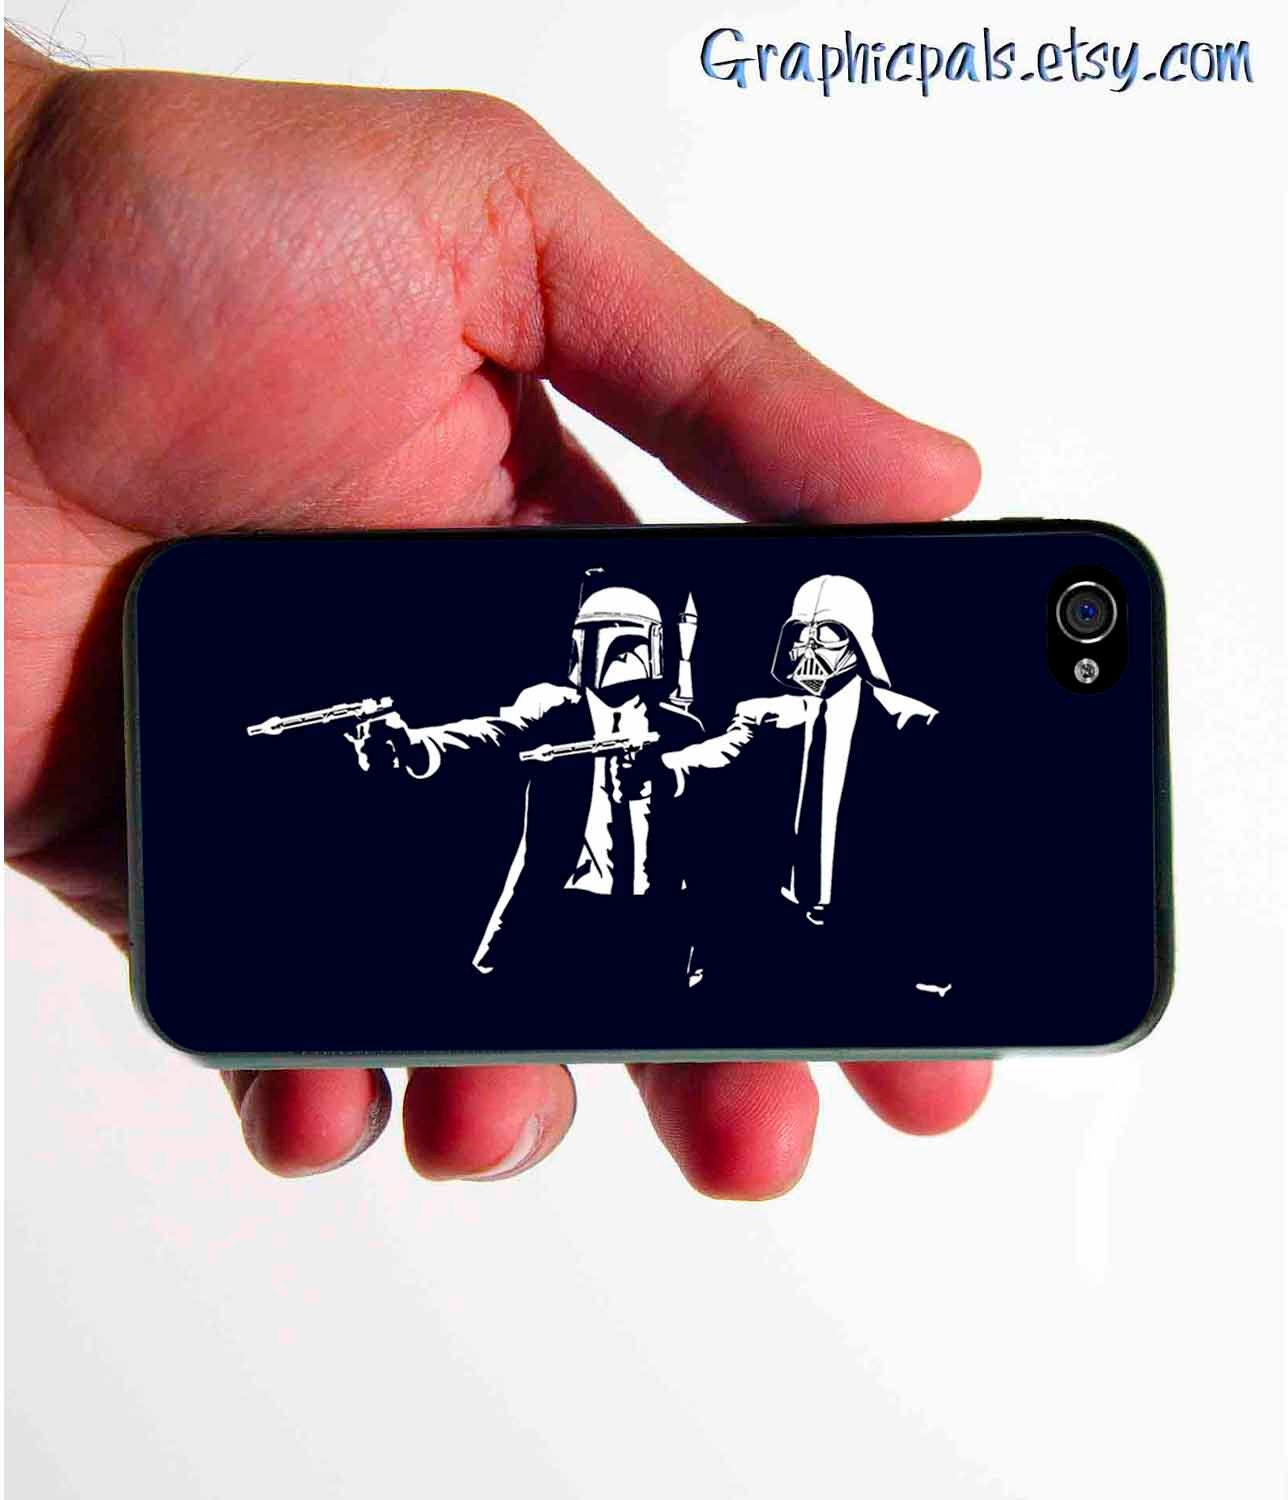 iphone 4 4s case Star Wars Pulp/Fiction GEEKERY